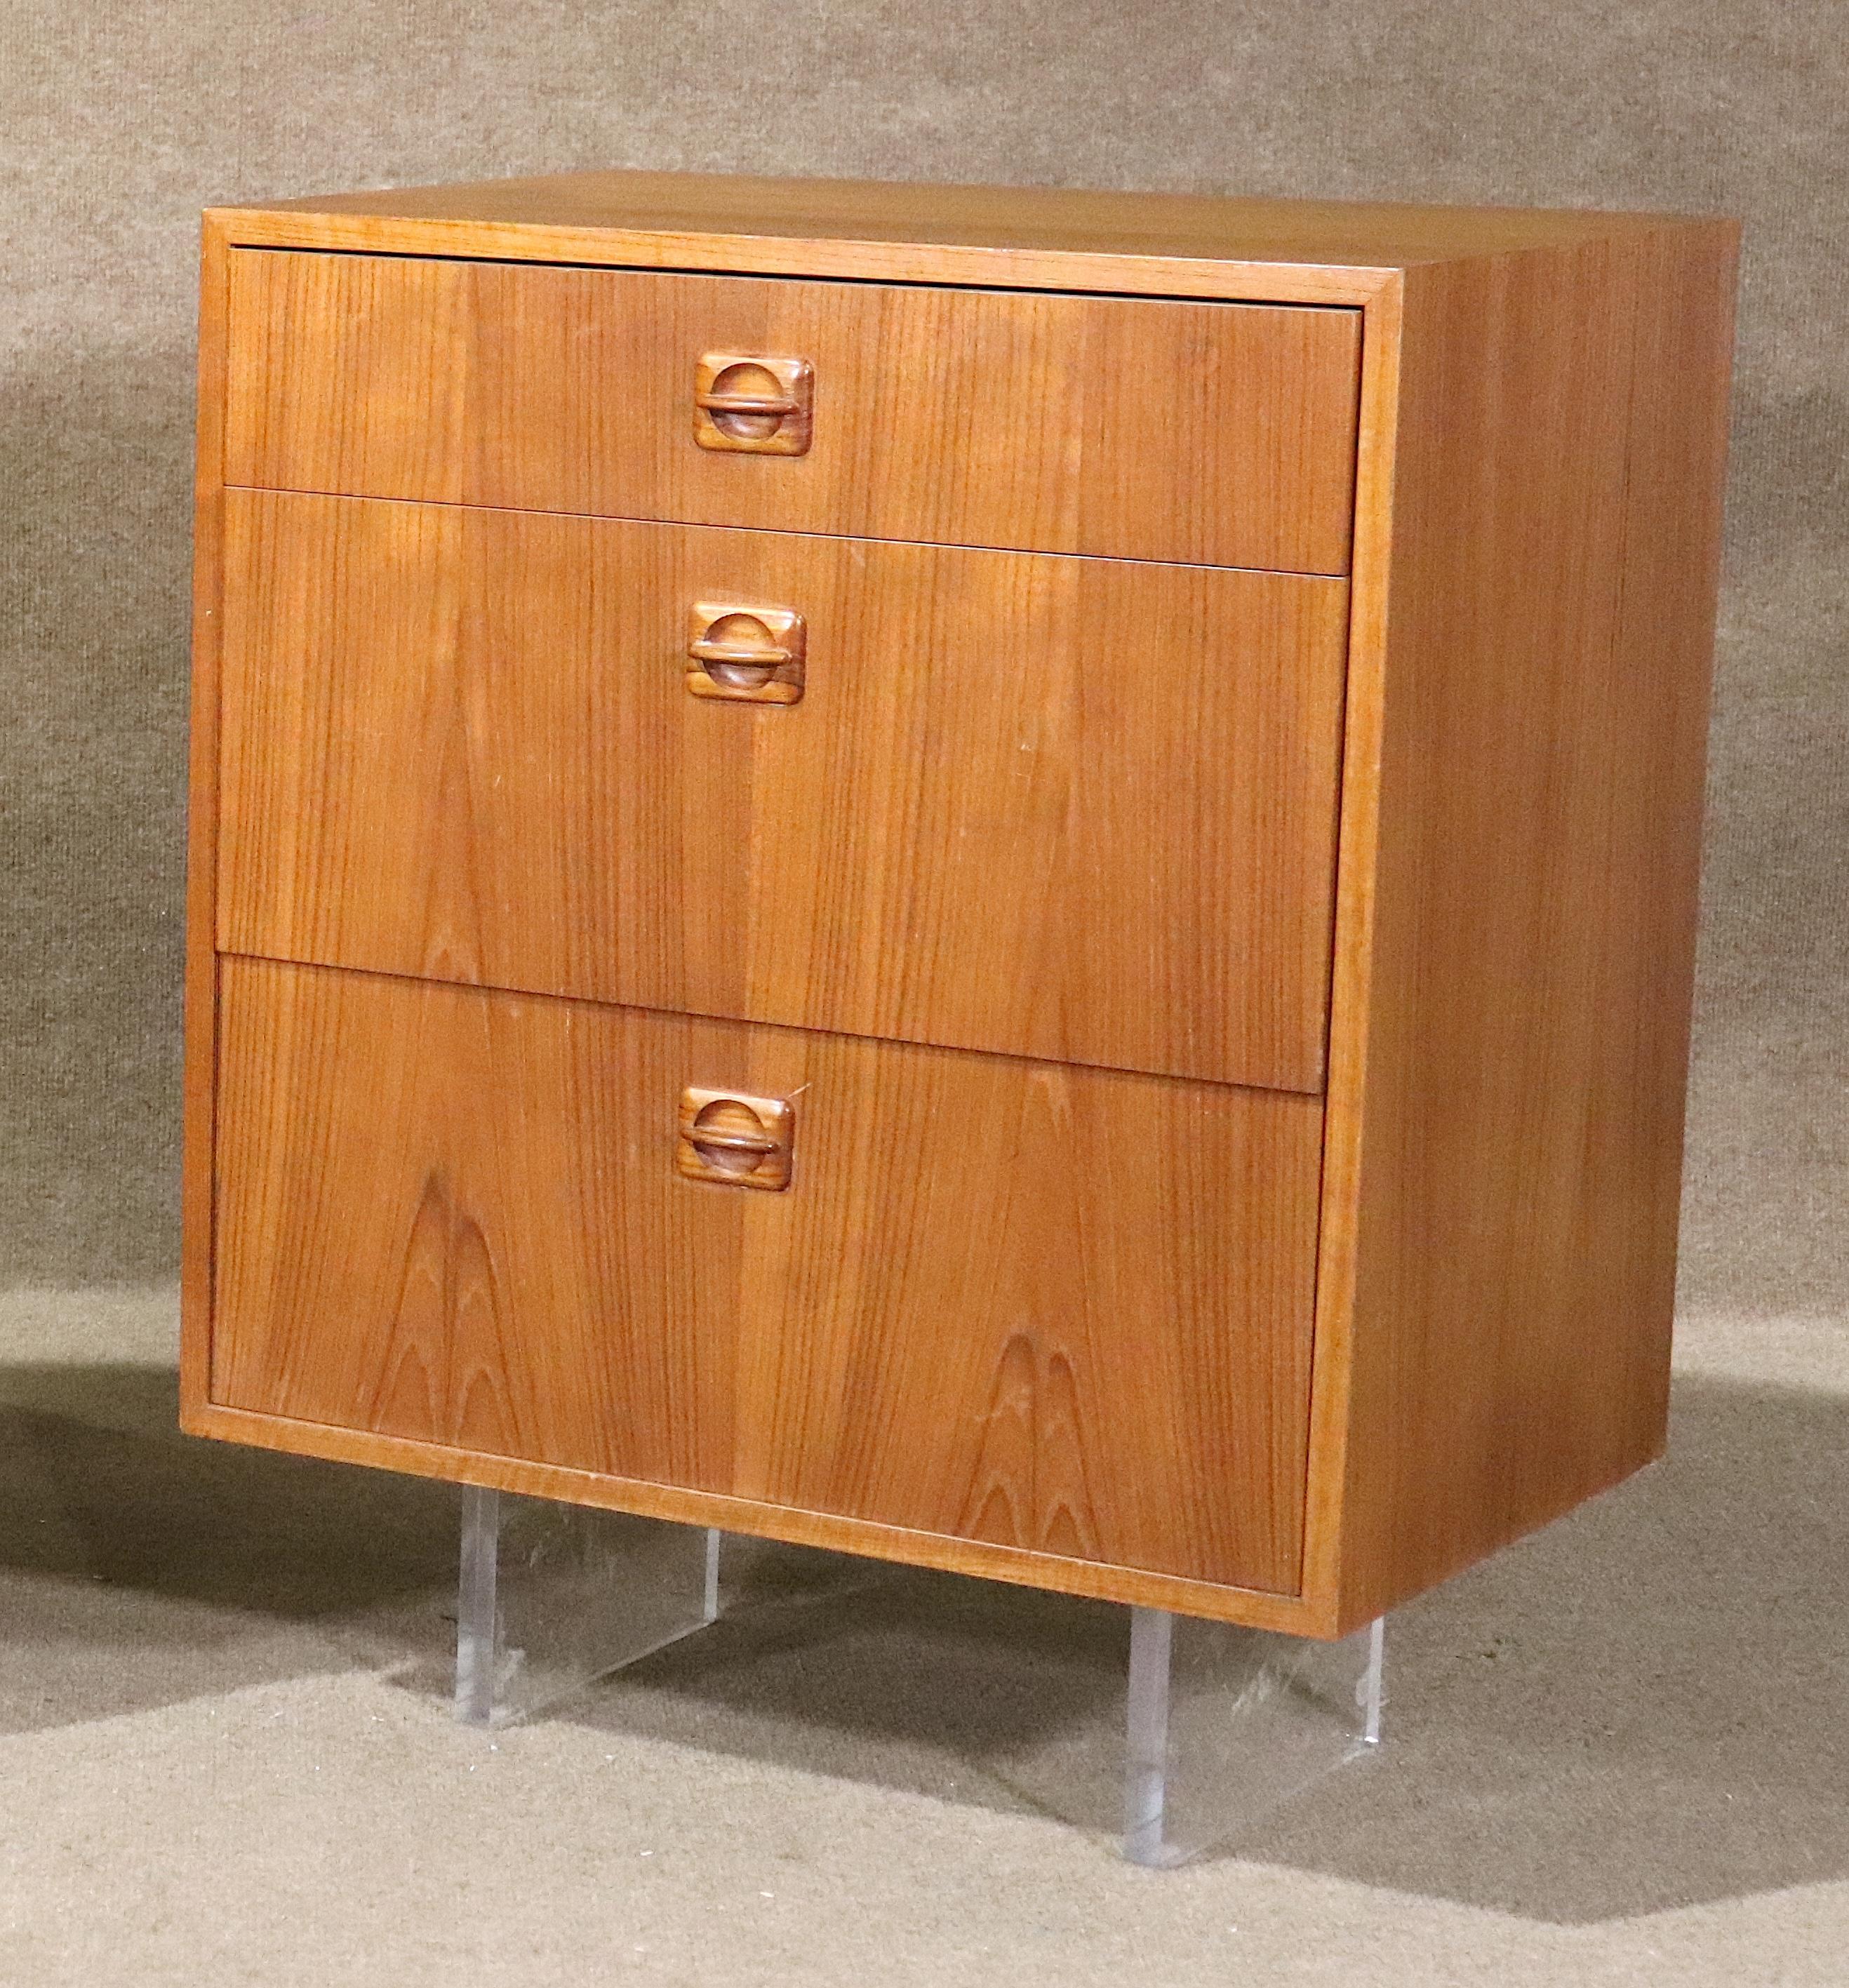 Teak Cabinet & Dresser w/ Acrylic Legs In Good Condition For Sale In Brooklyn, NY